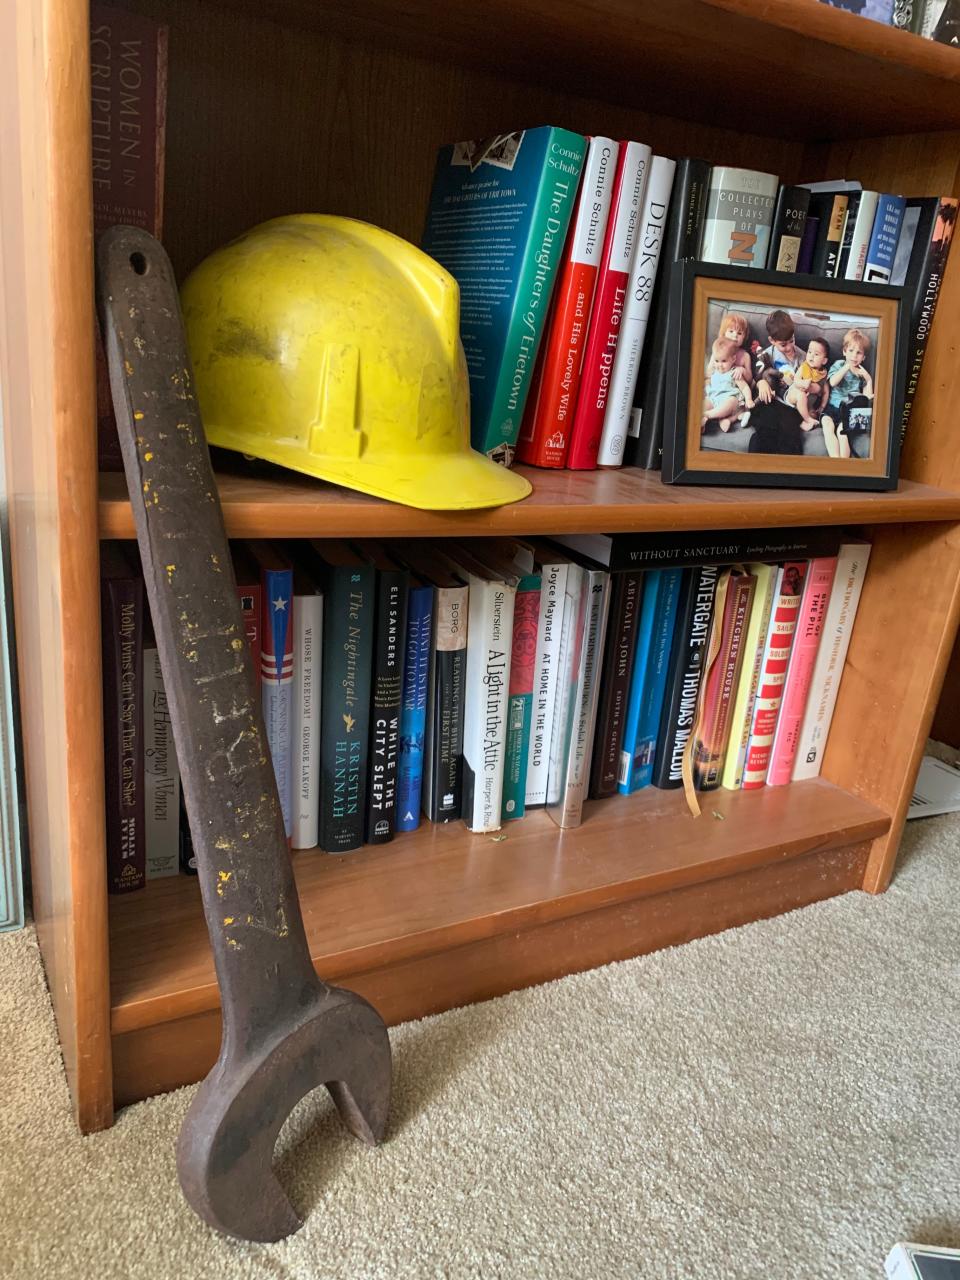 Connie Schultz keeps in her home office the worn hard hat and 11-pound wrench her father used as a utility worker at a power plant. The items, gifts from one of his supervisors, are on a low shelf so her grandchildren can see them and next to her books as a thank-you to her father.